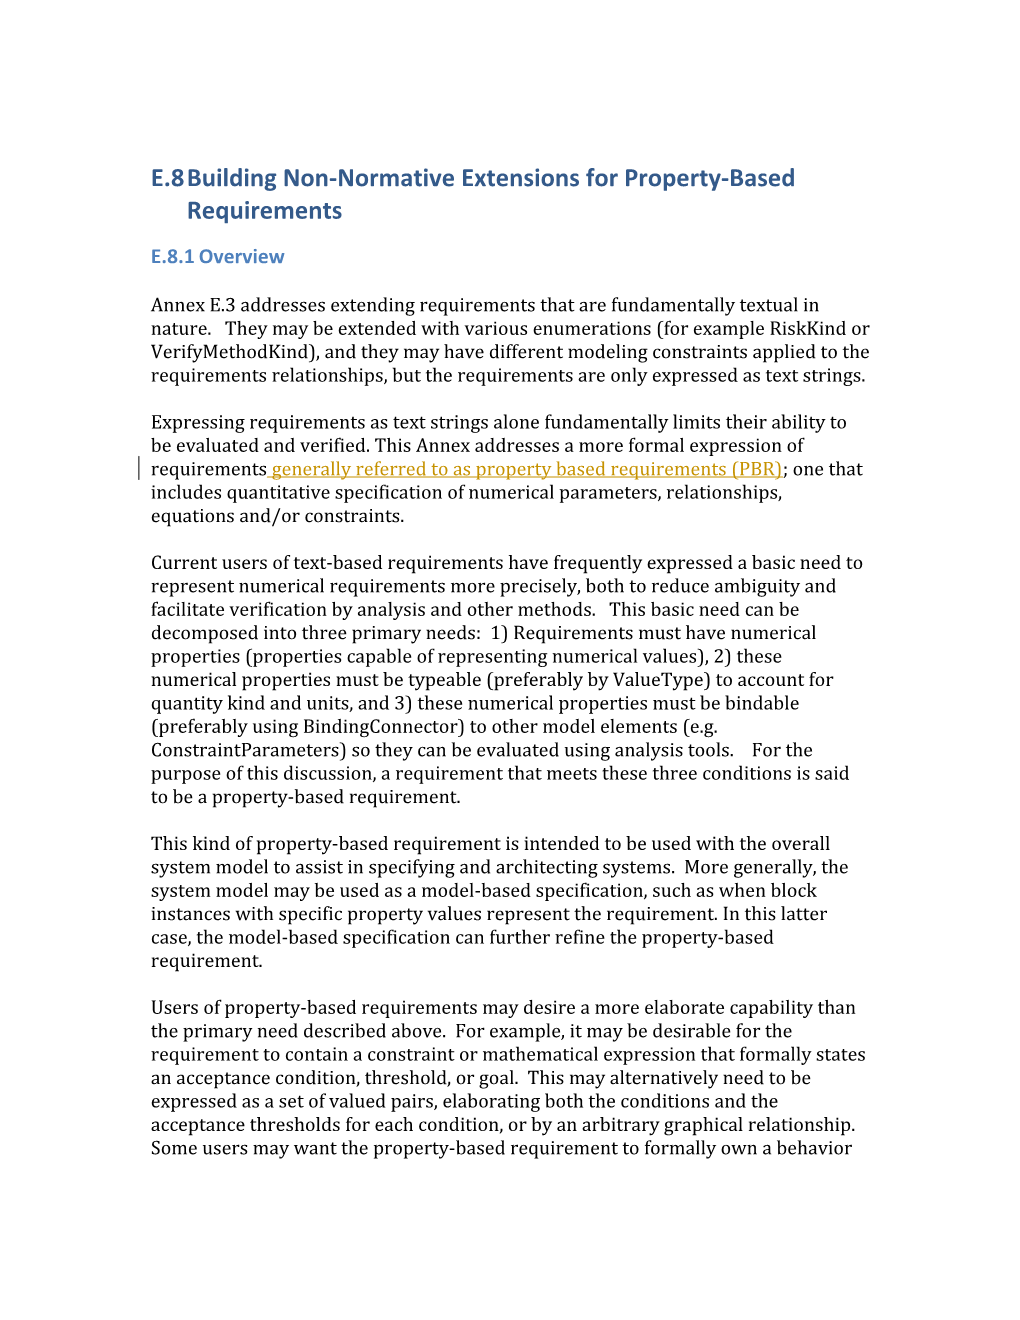 E.8Building Non-Normative Extensions for Property-Based Requirements